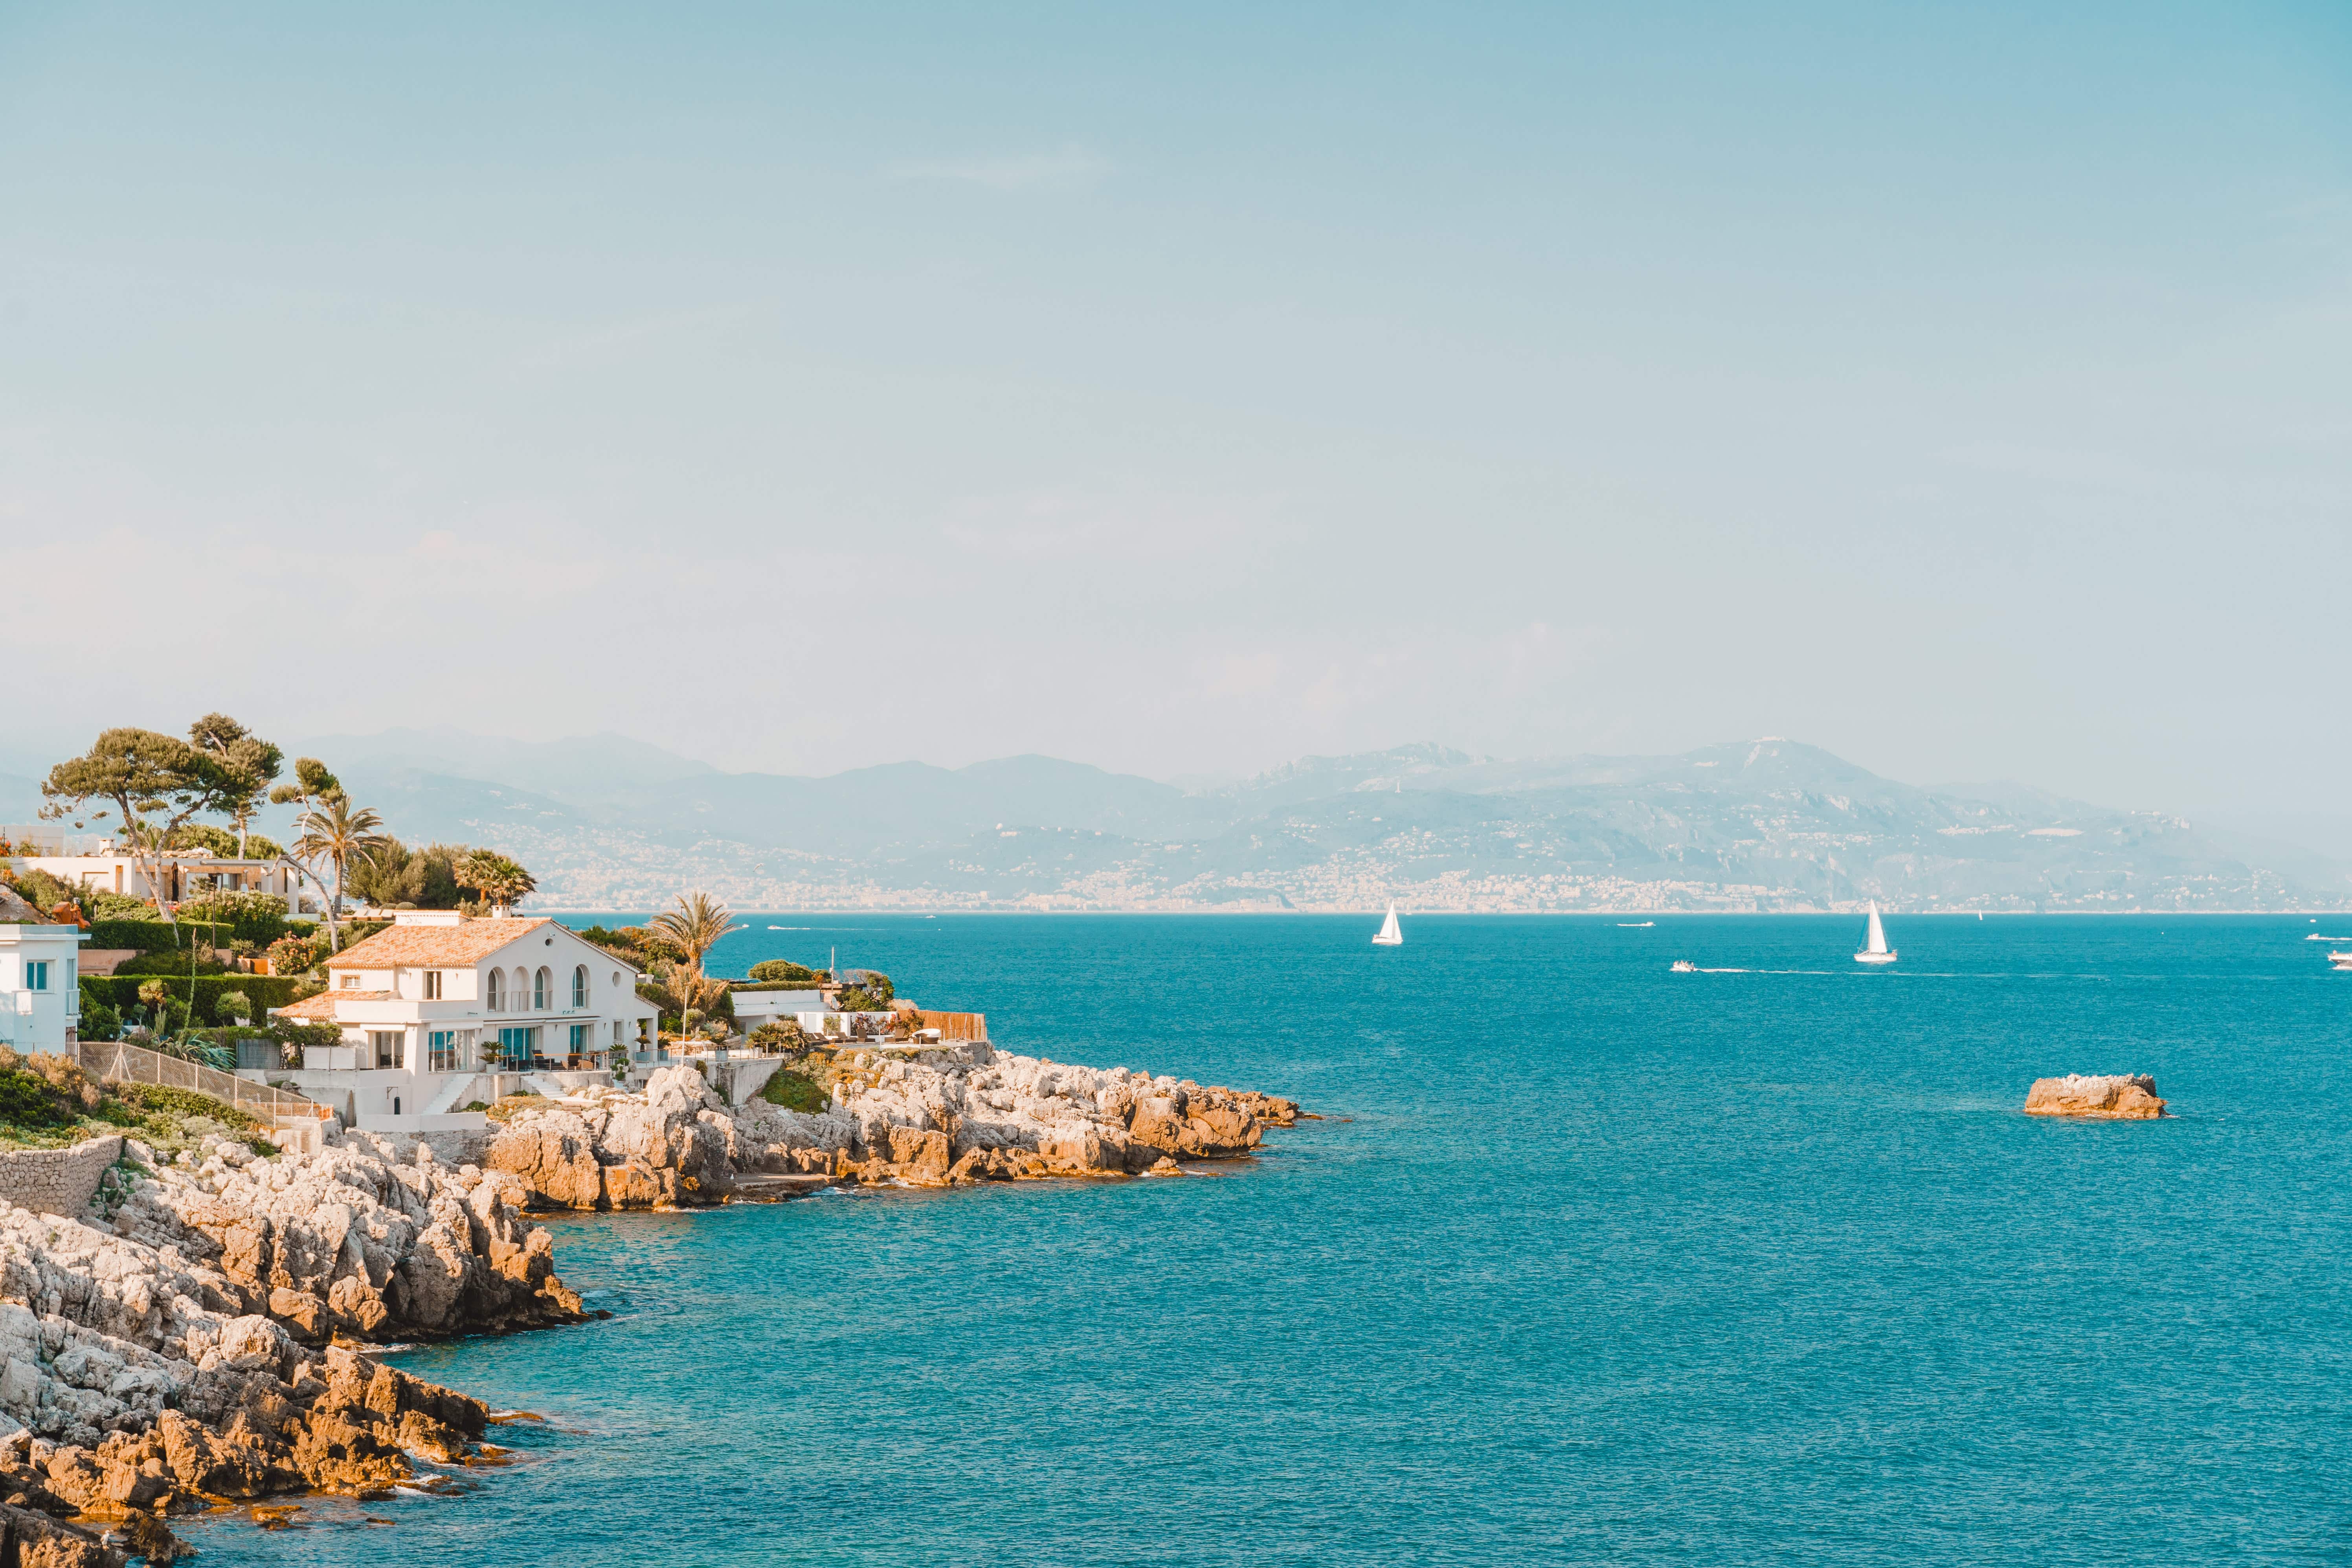 view of cap d'antibes with mansions and boats